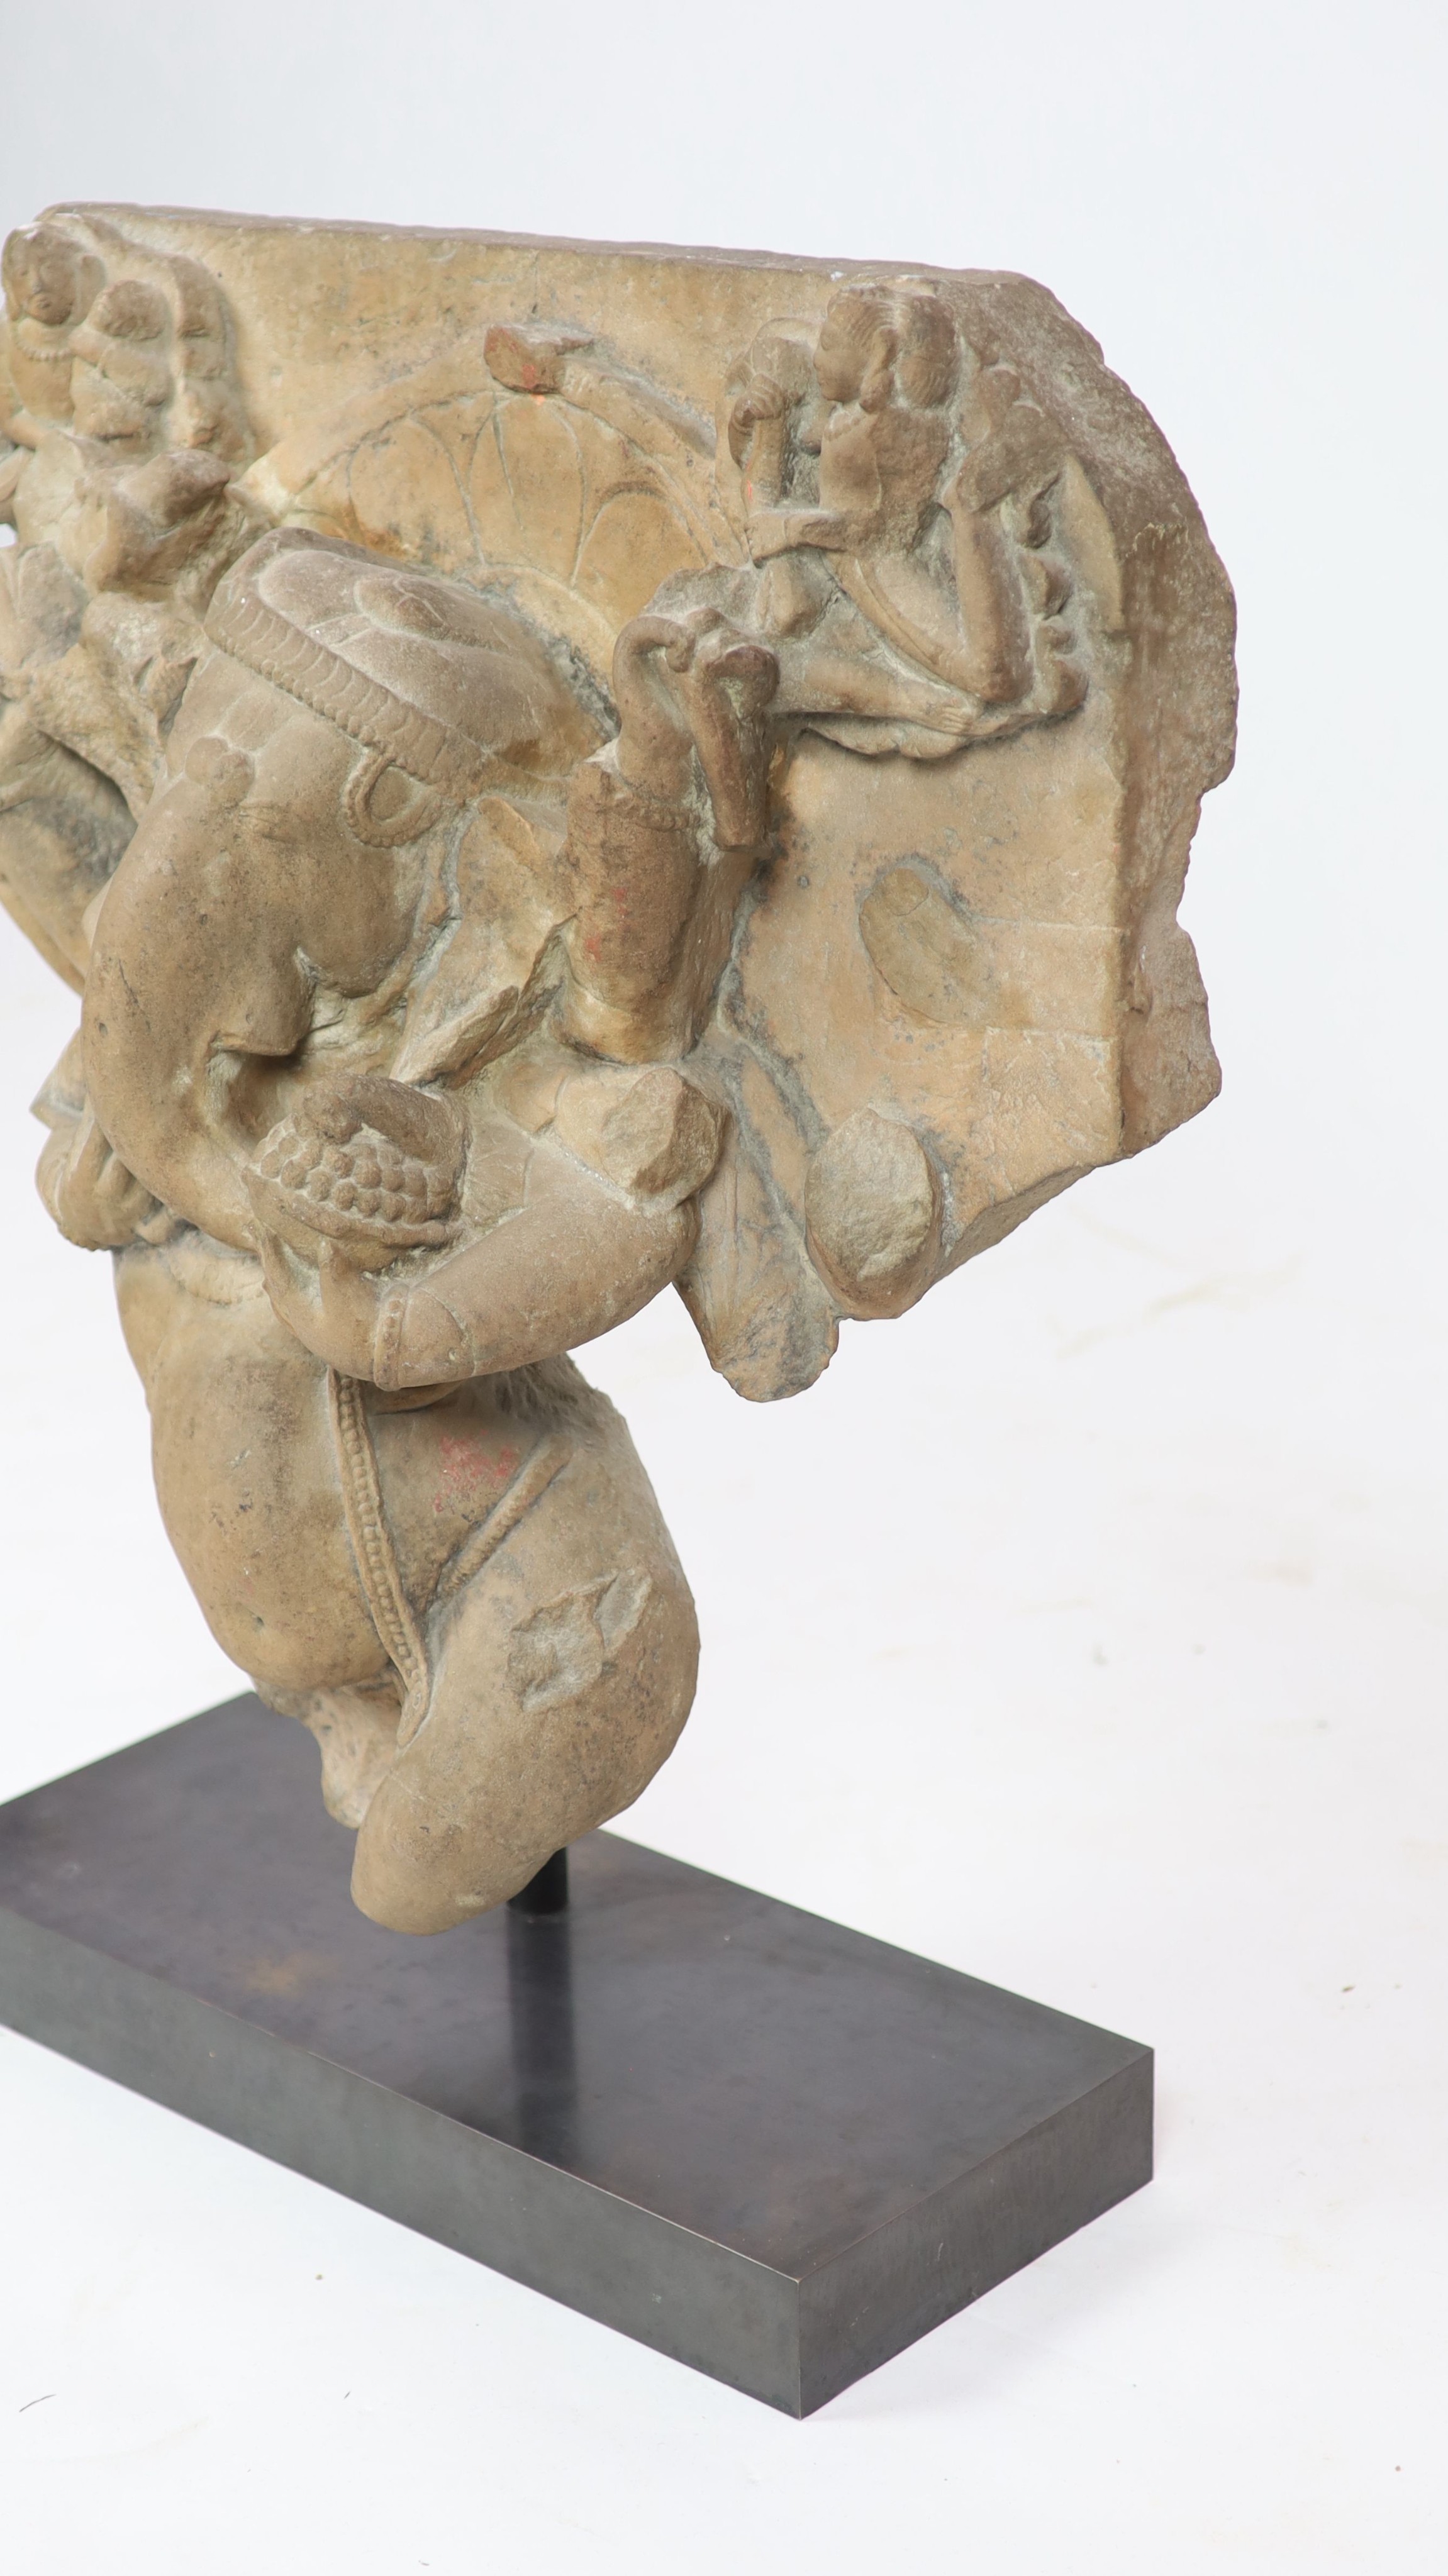 An Indian sandstone Ganesha stele fragment, Rajasthan 11th/12th century, 66cm high, 60 cm wide, excluding metal stand